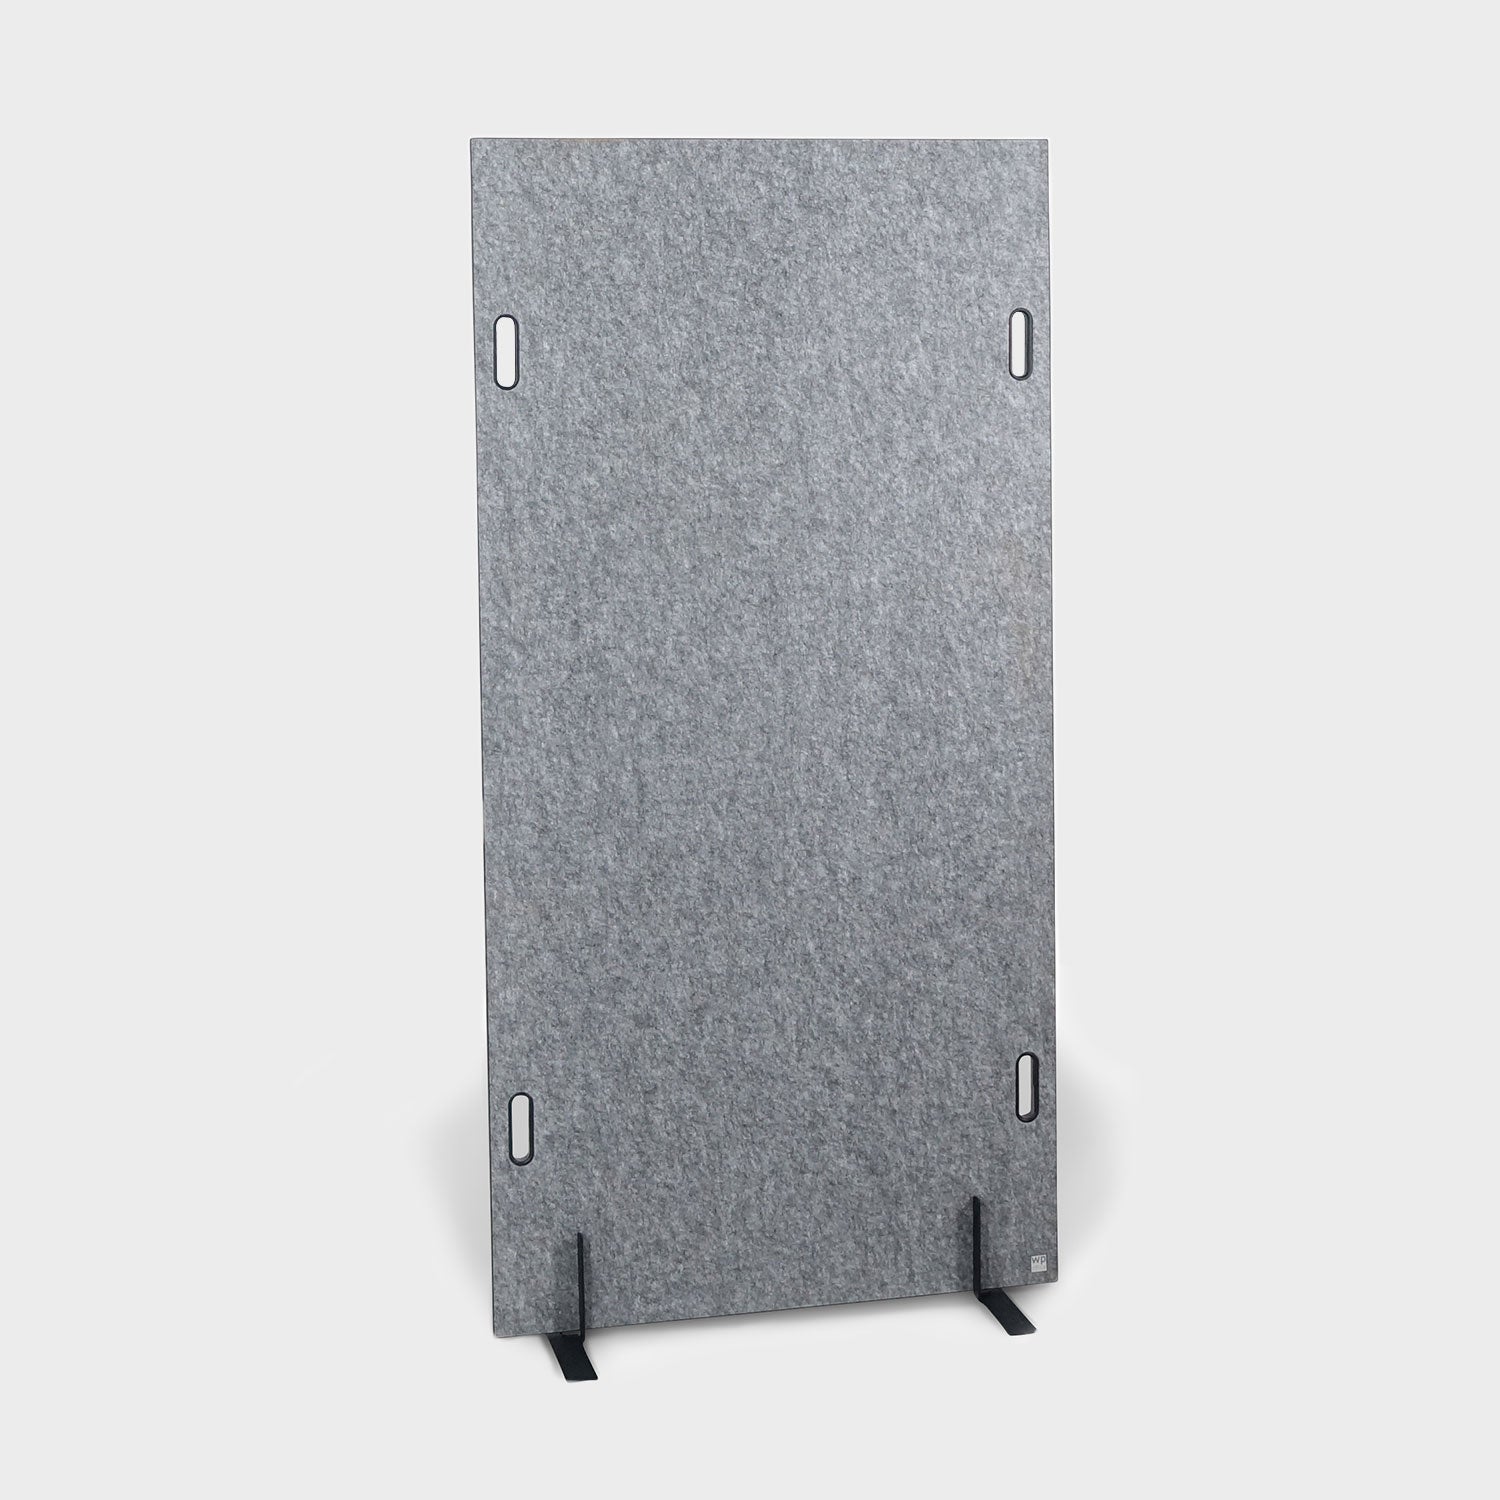 Acoustic room divider - motu acoustic shield with adjustable feet